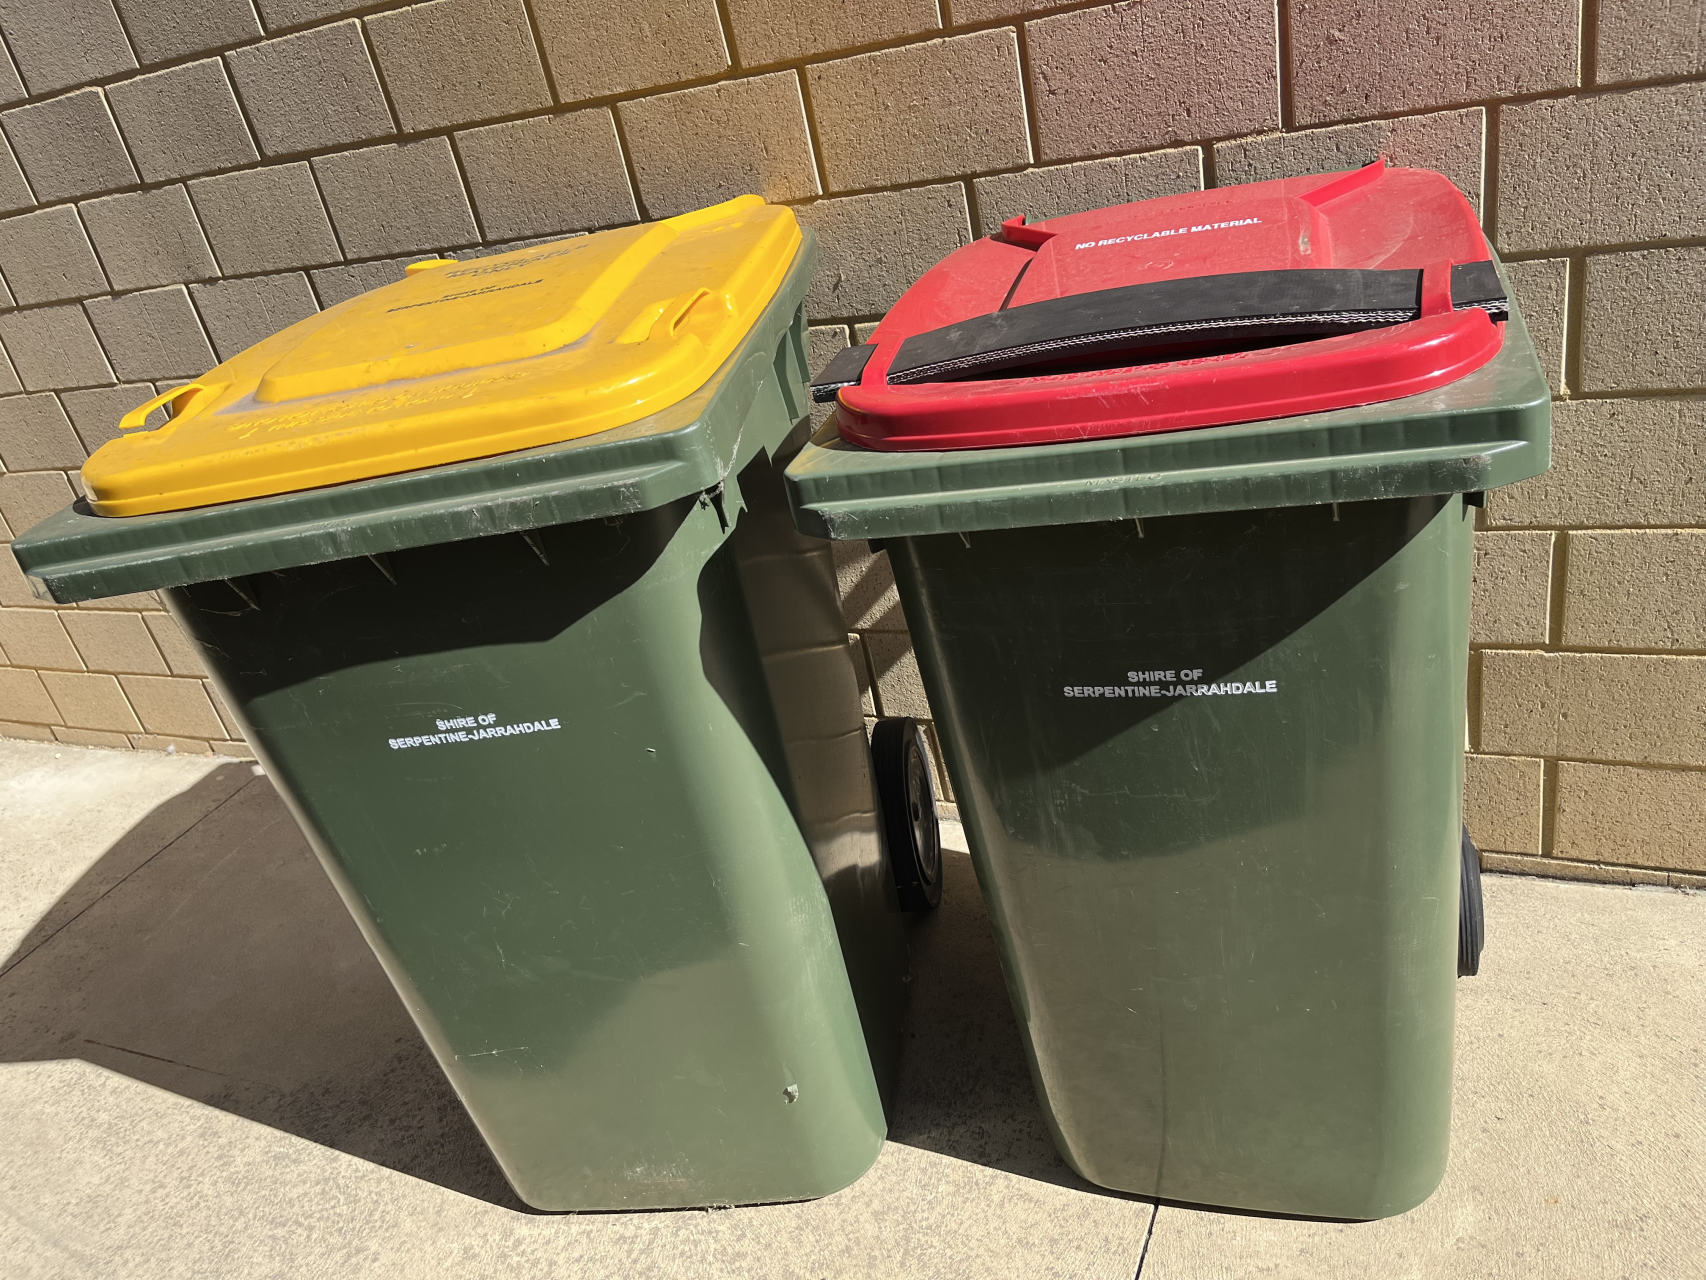 Bin collection service – Wednesday, 19 April 2023